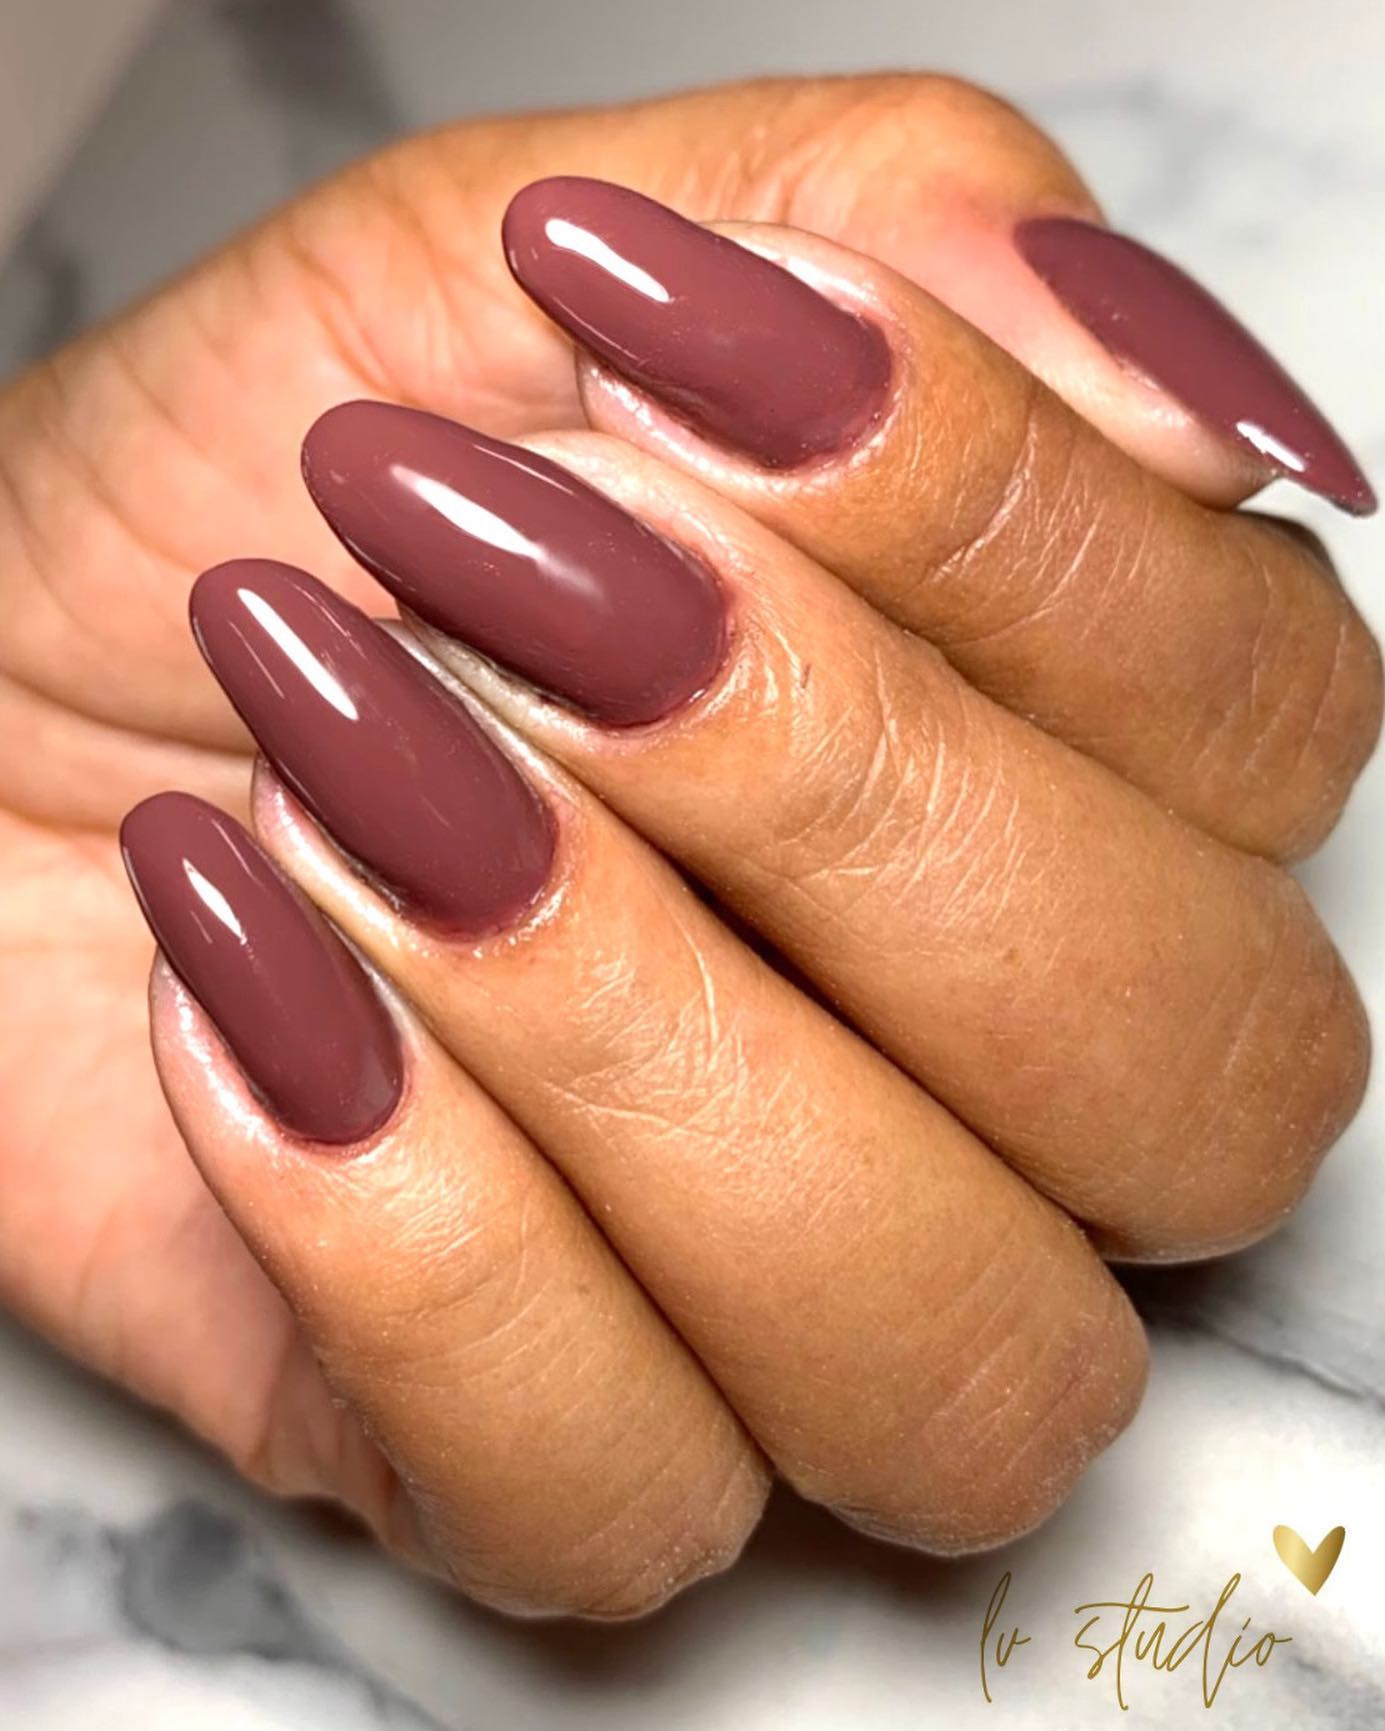 True fall shade that will look the best on those who like to experiment with different shades of nude.